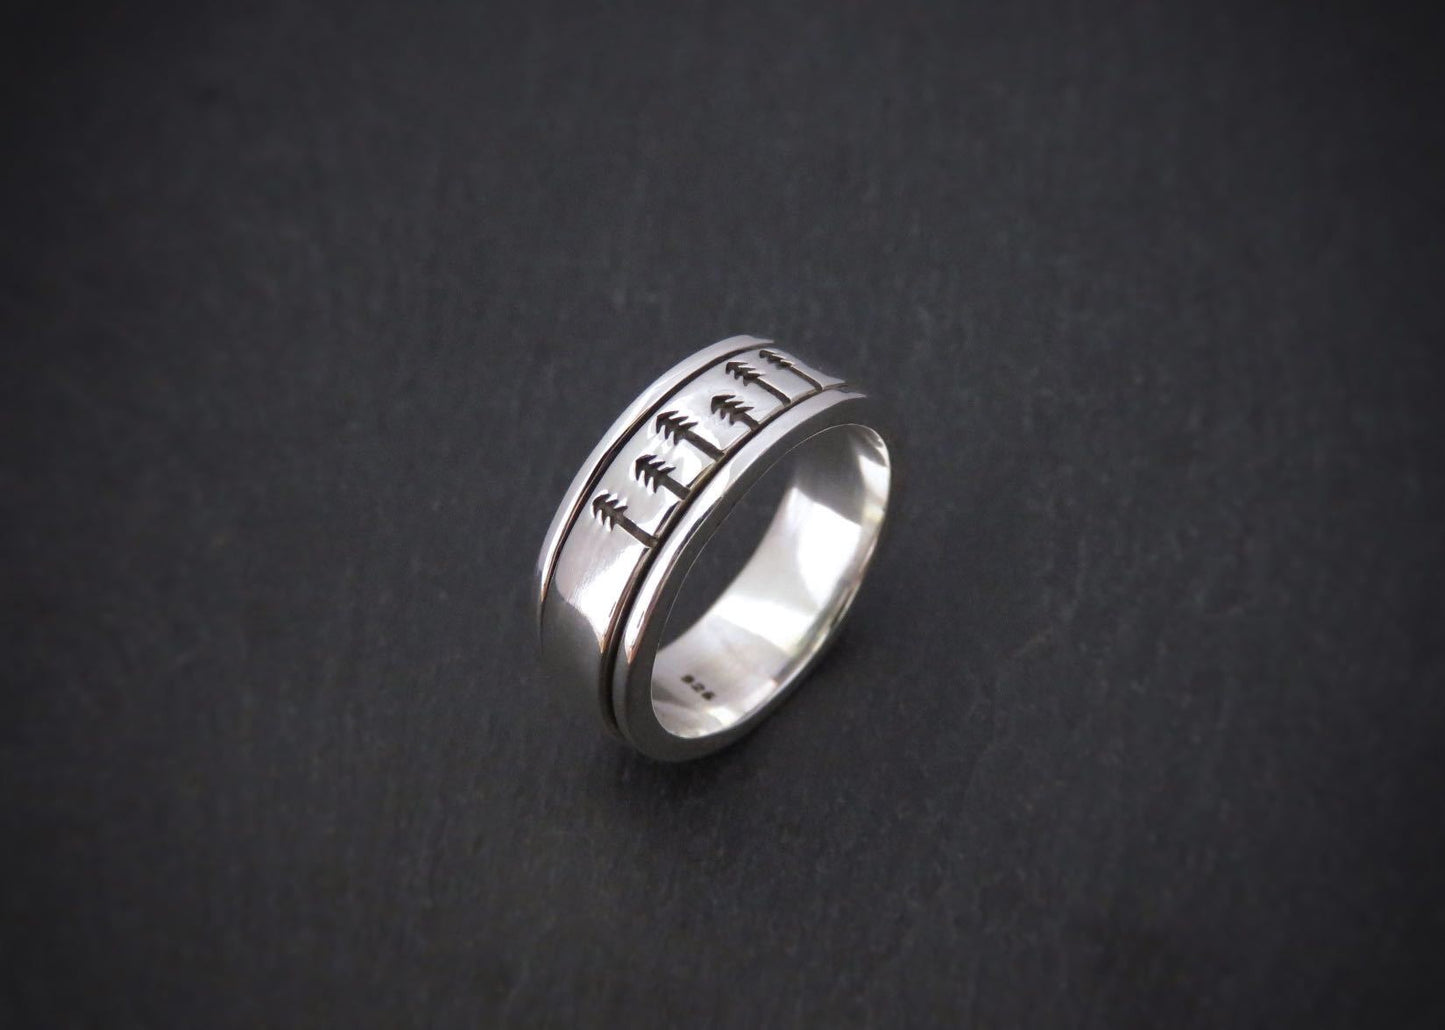 Rotating men's ring made of silver with trees